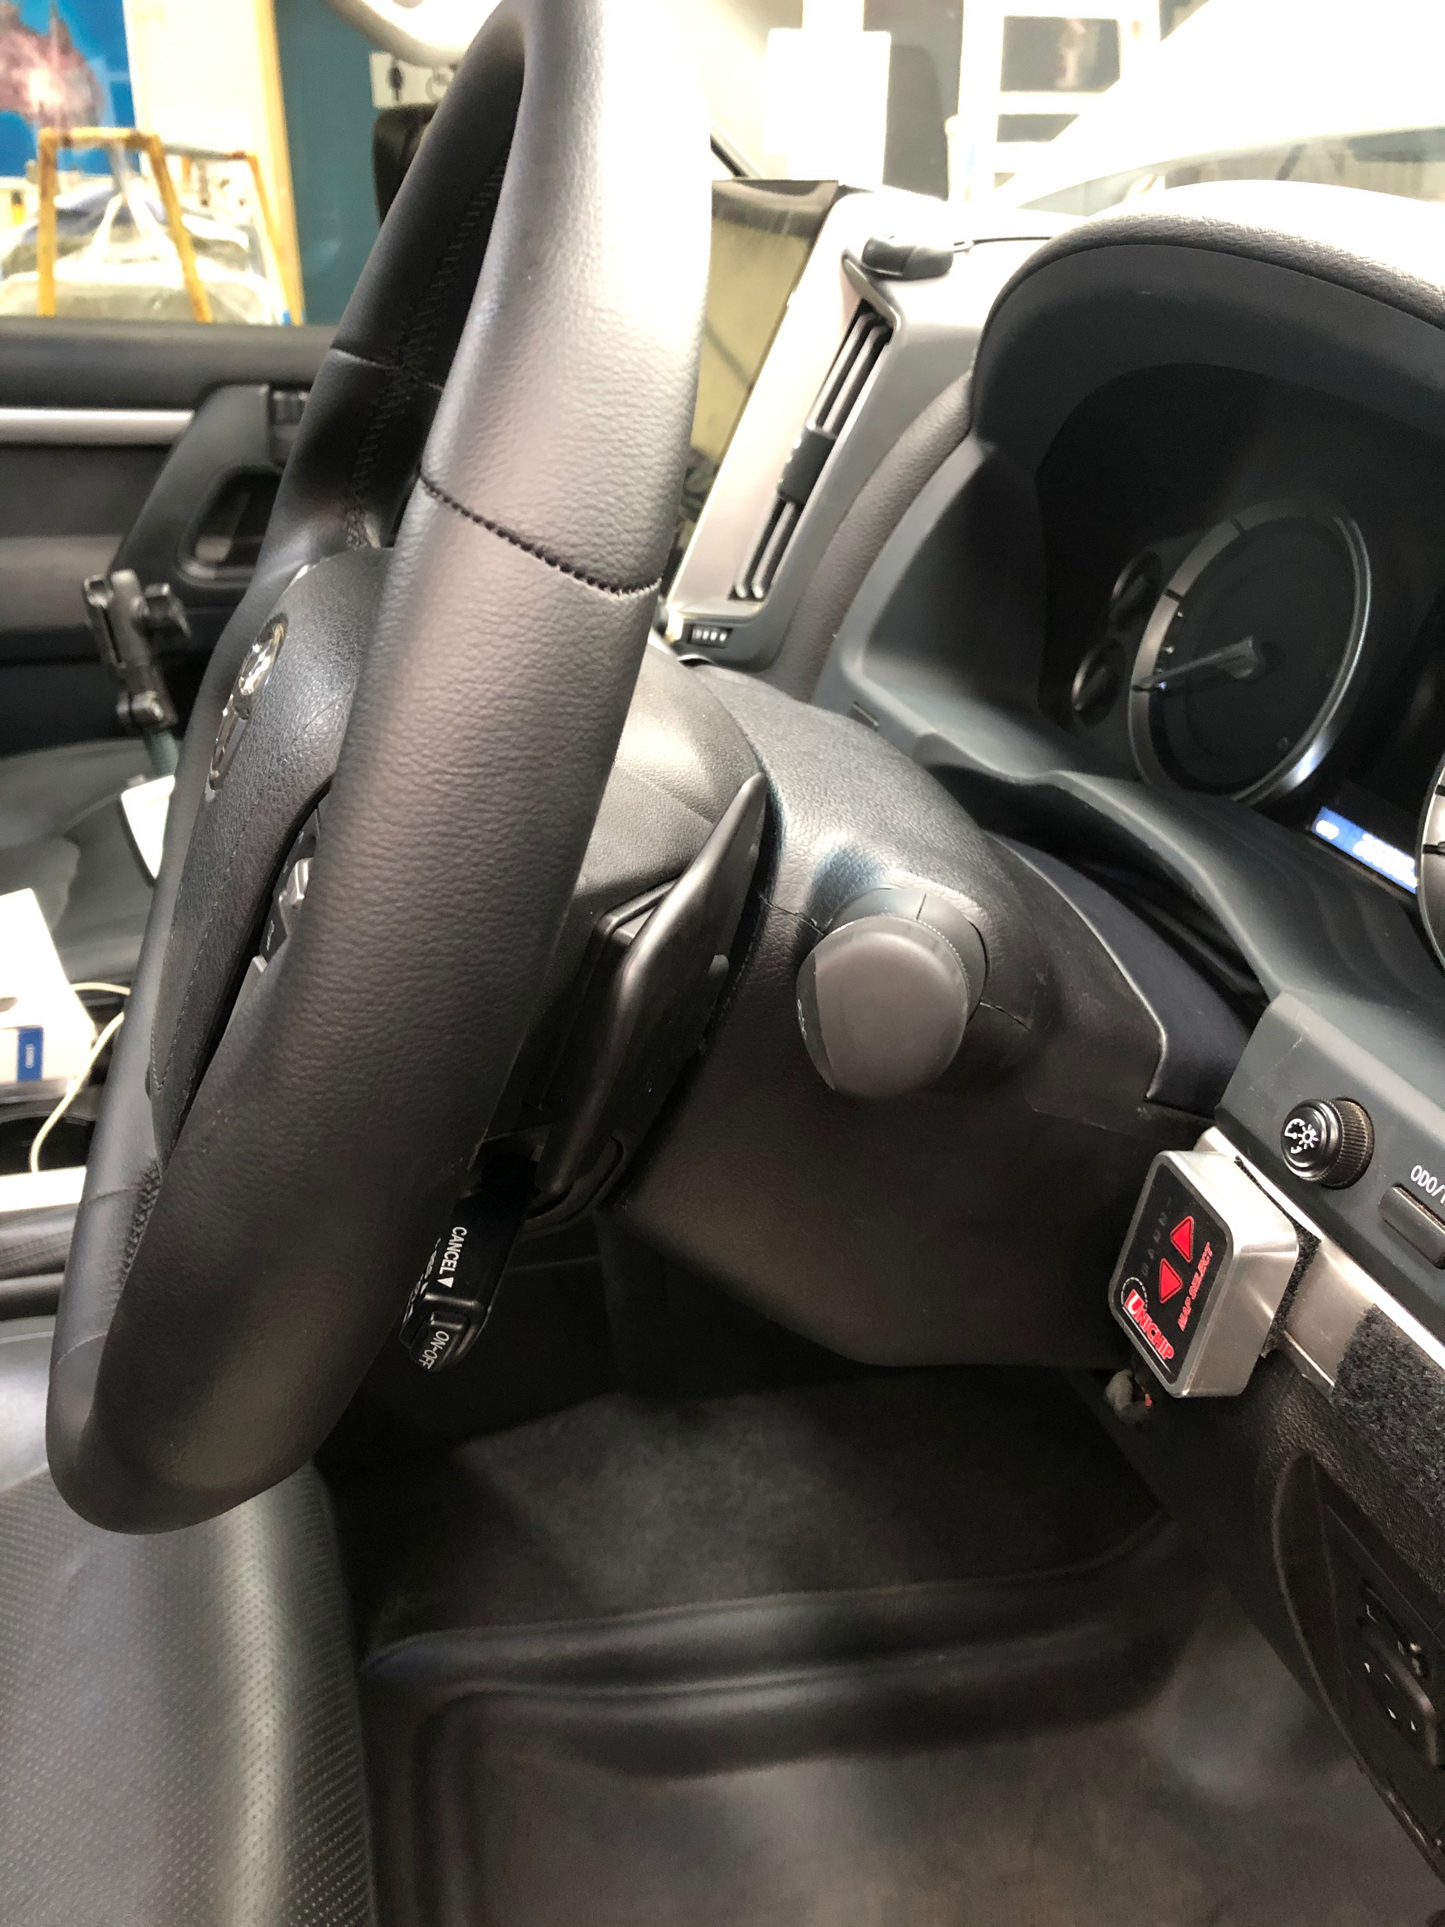 Paddle Shift kit to suit LC200 2016+